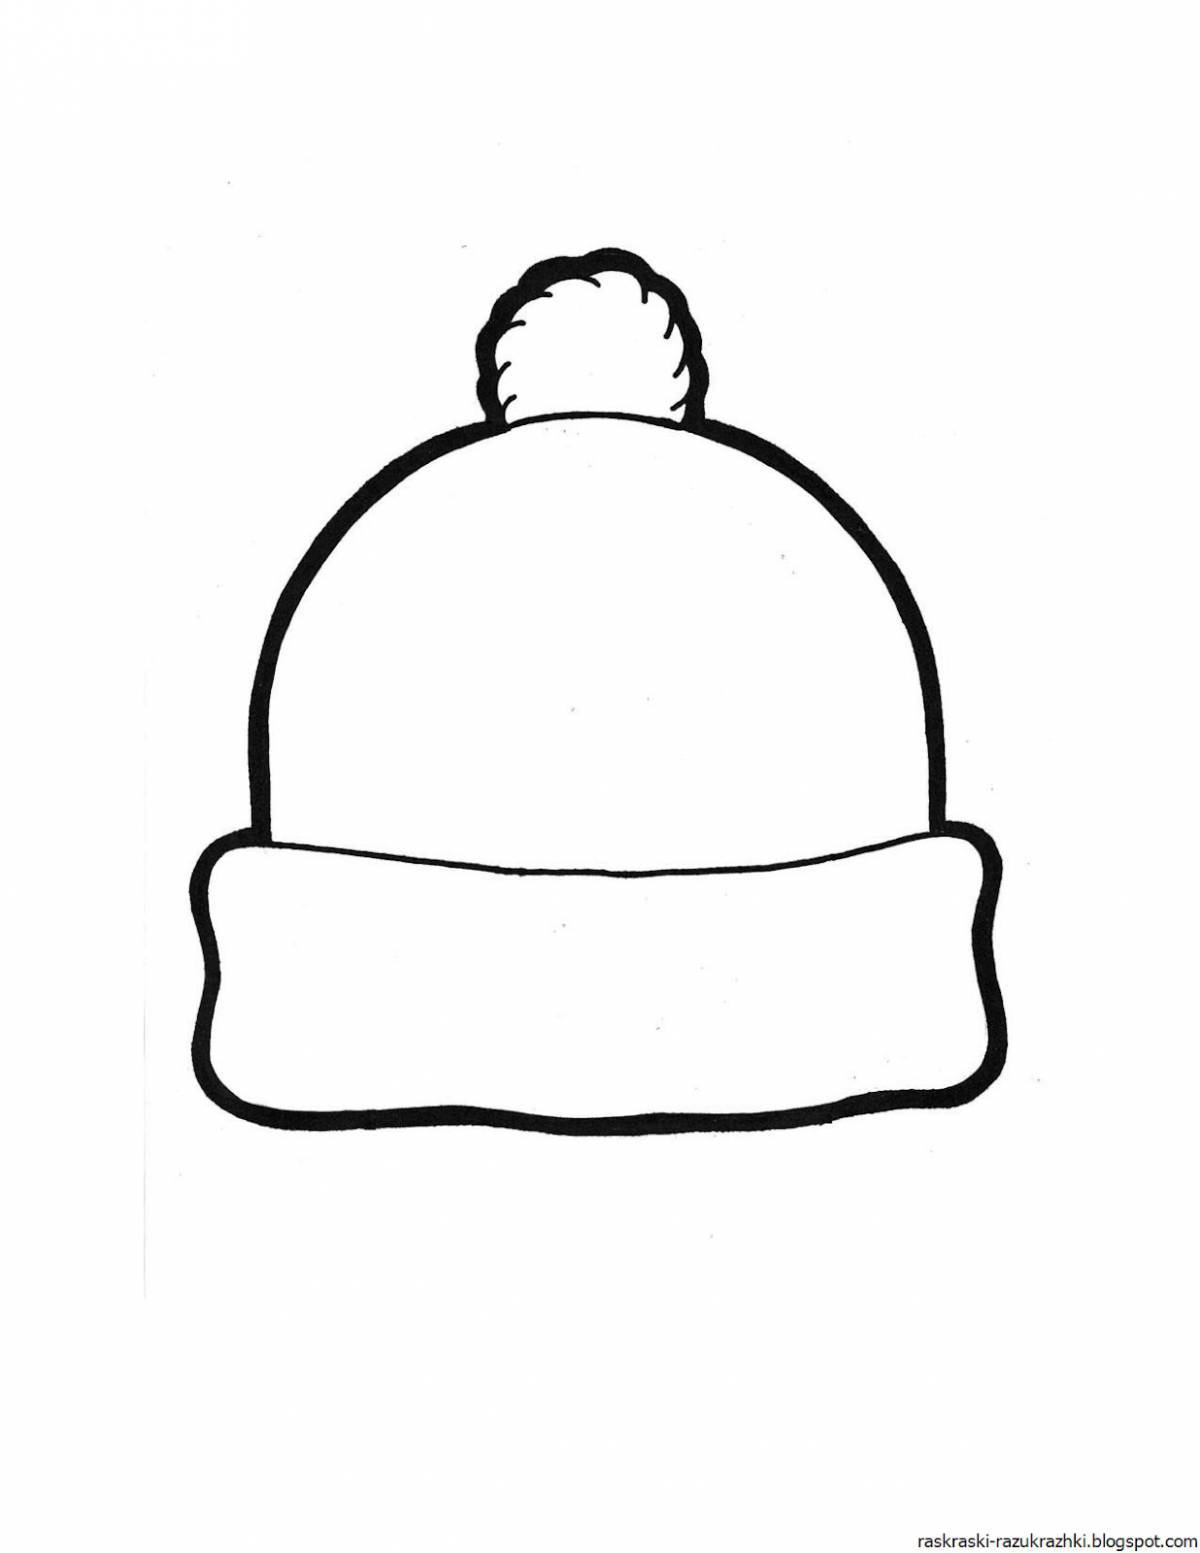 Coloring fancy hat for kids